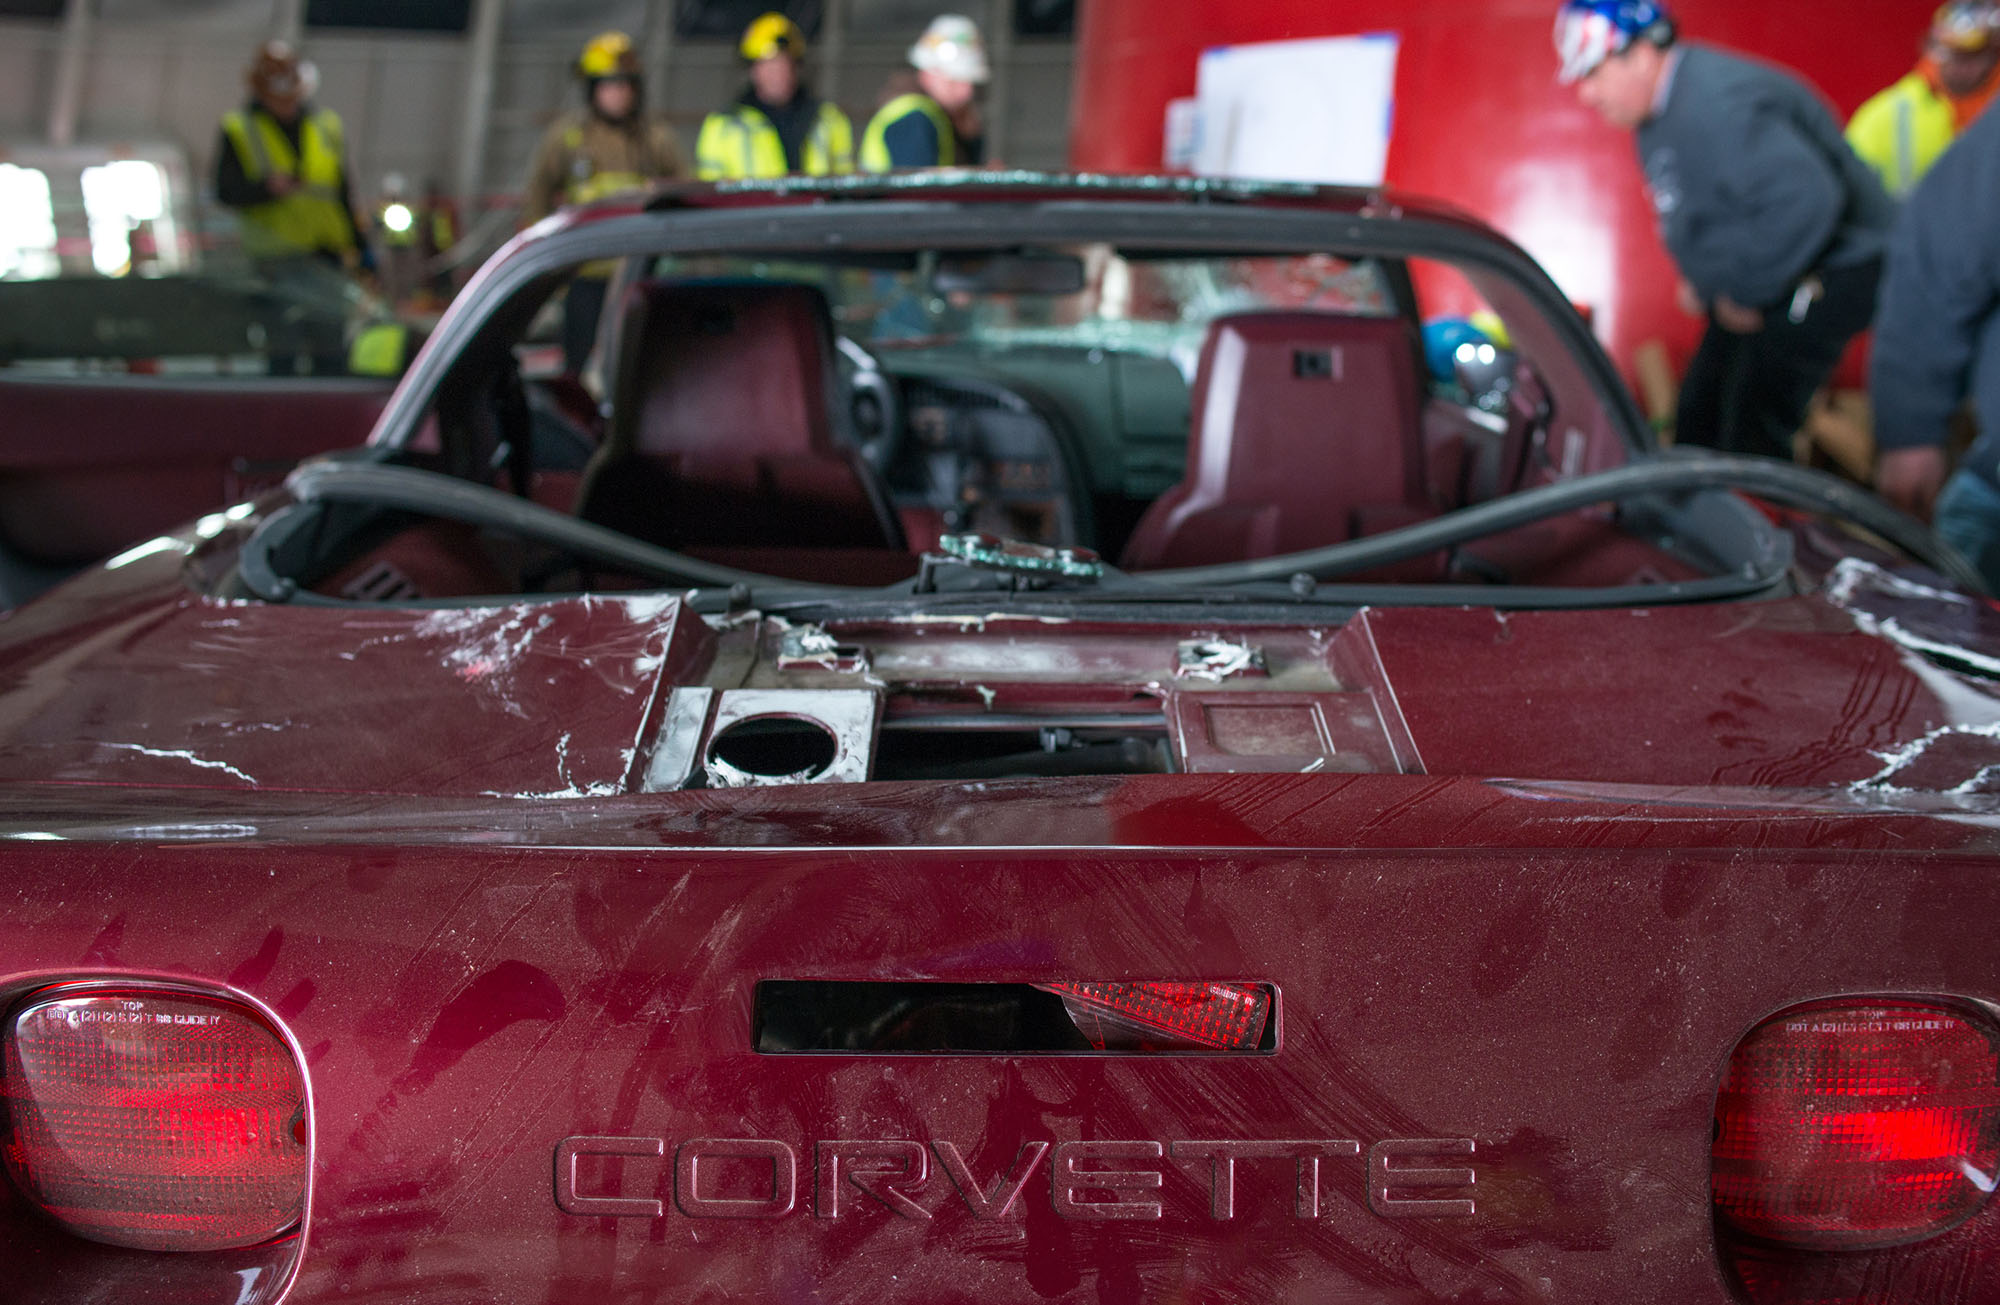 The 1993 Chevrolet Corvette 40th Anniversary vehicle that fell into the sinkhole